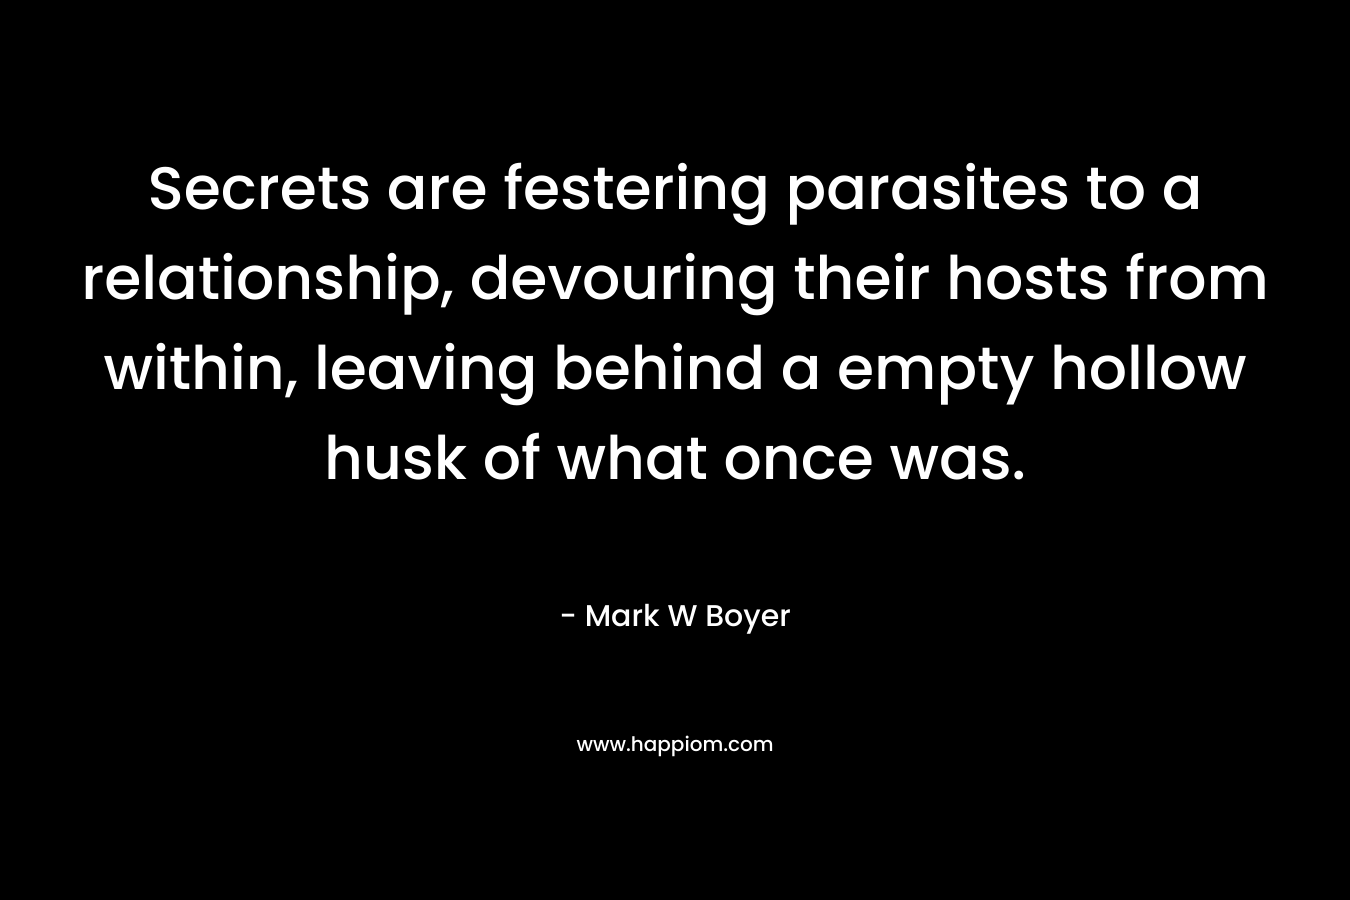 Secrets are festering parasites to a relationship, devouring their hosts from within, leaving behind a empty hollow husk of what once was. – Mark W Boyer